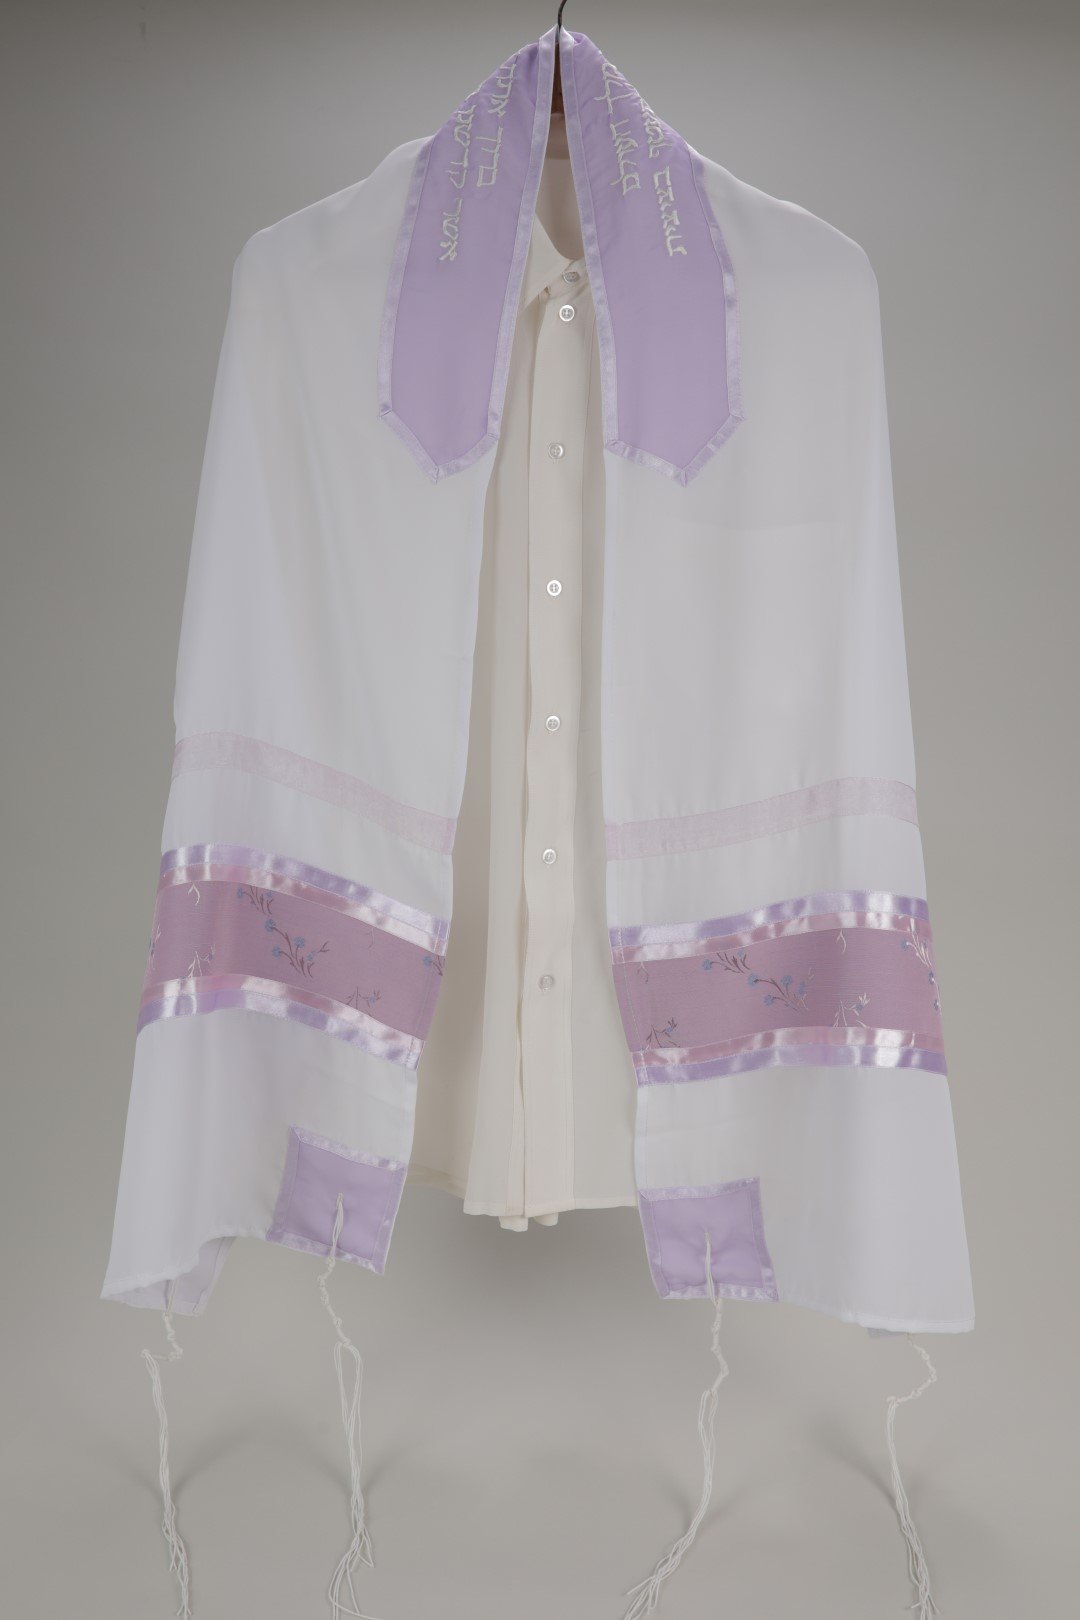 Women's Tallit Long gone are the days when women were not allowed to wear Tallits. But with a fresh new progressive approach, we at galileesilks have also come up with a fresh new collection of women’s tallit. For more details, visit: https://www.galileesilks.com/collec by amramrafi